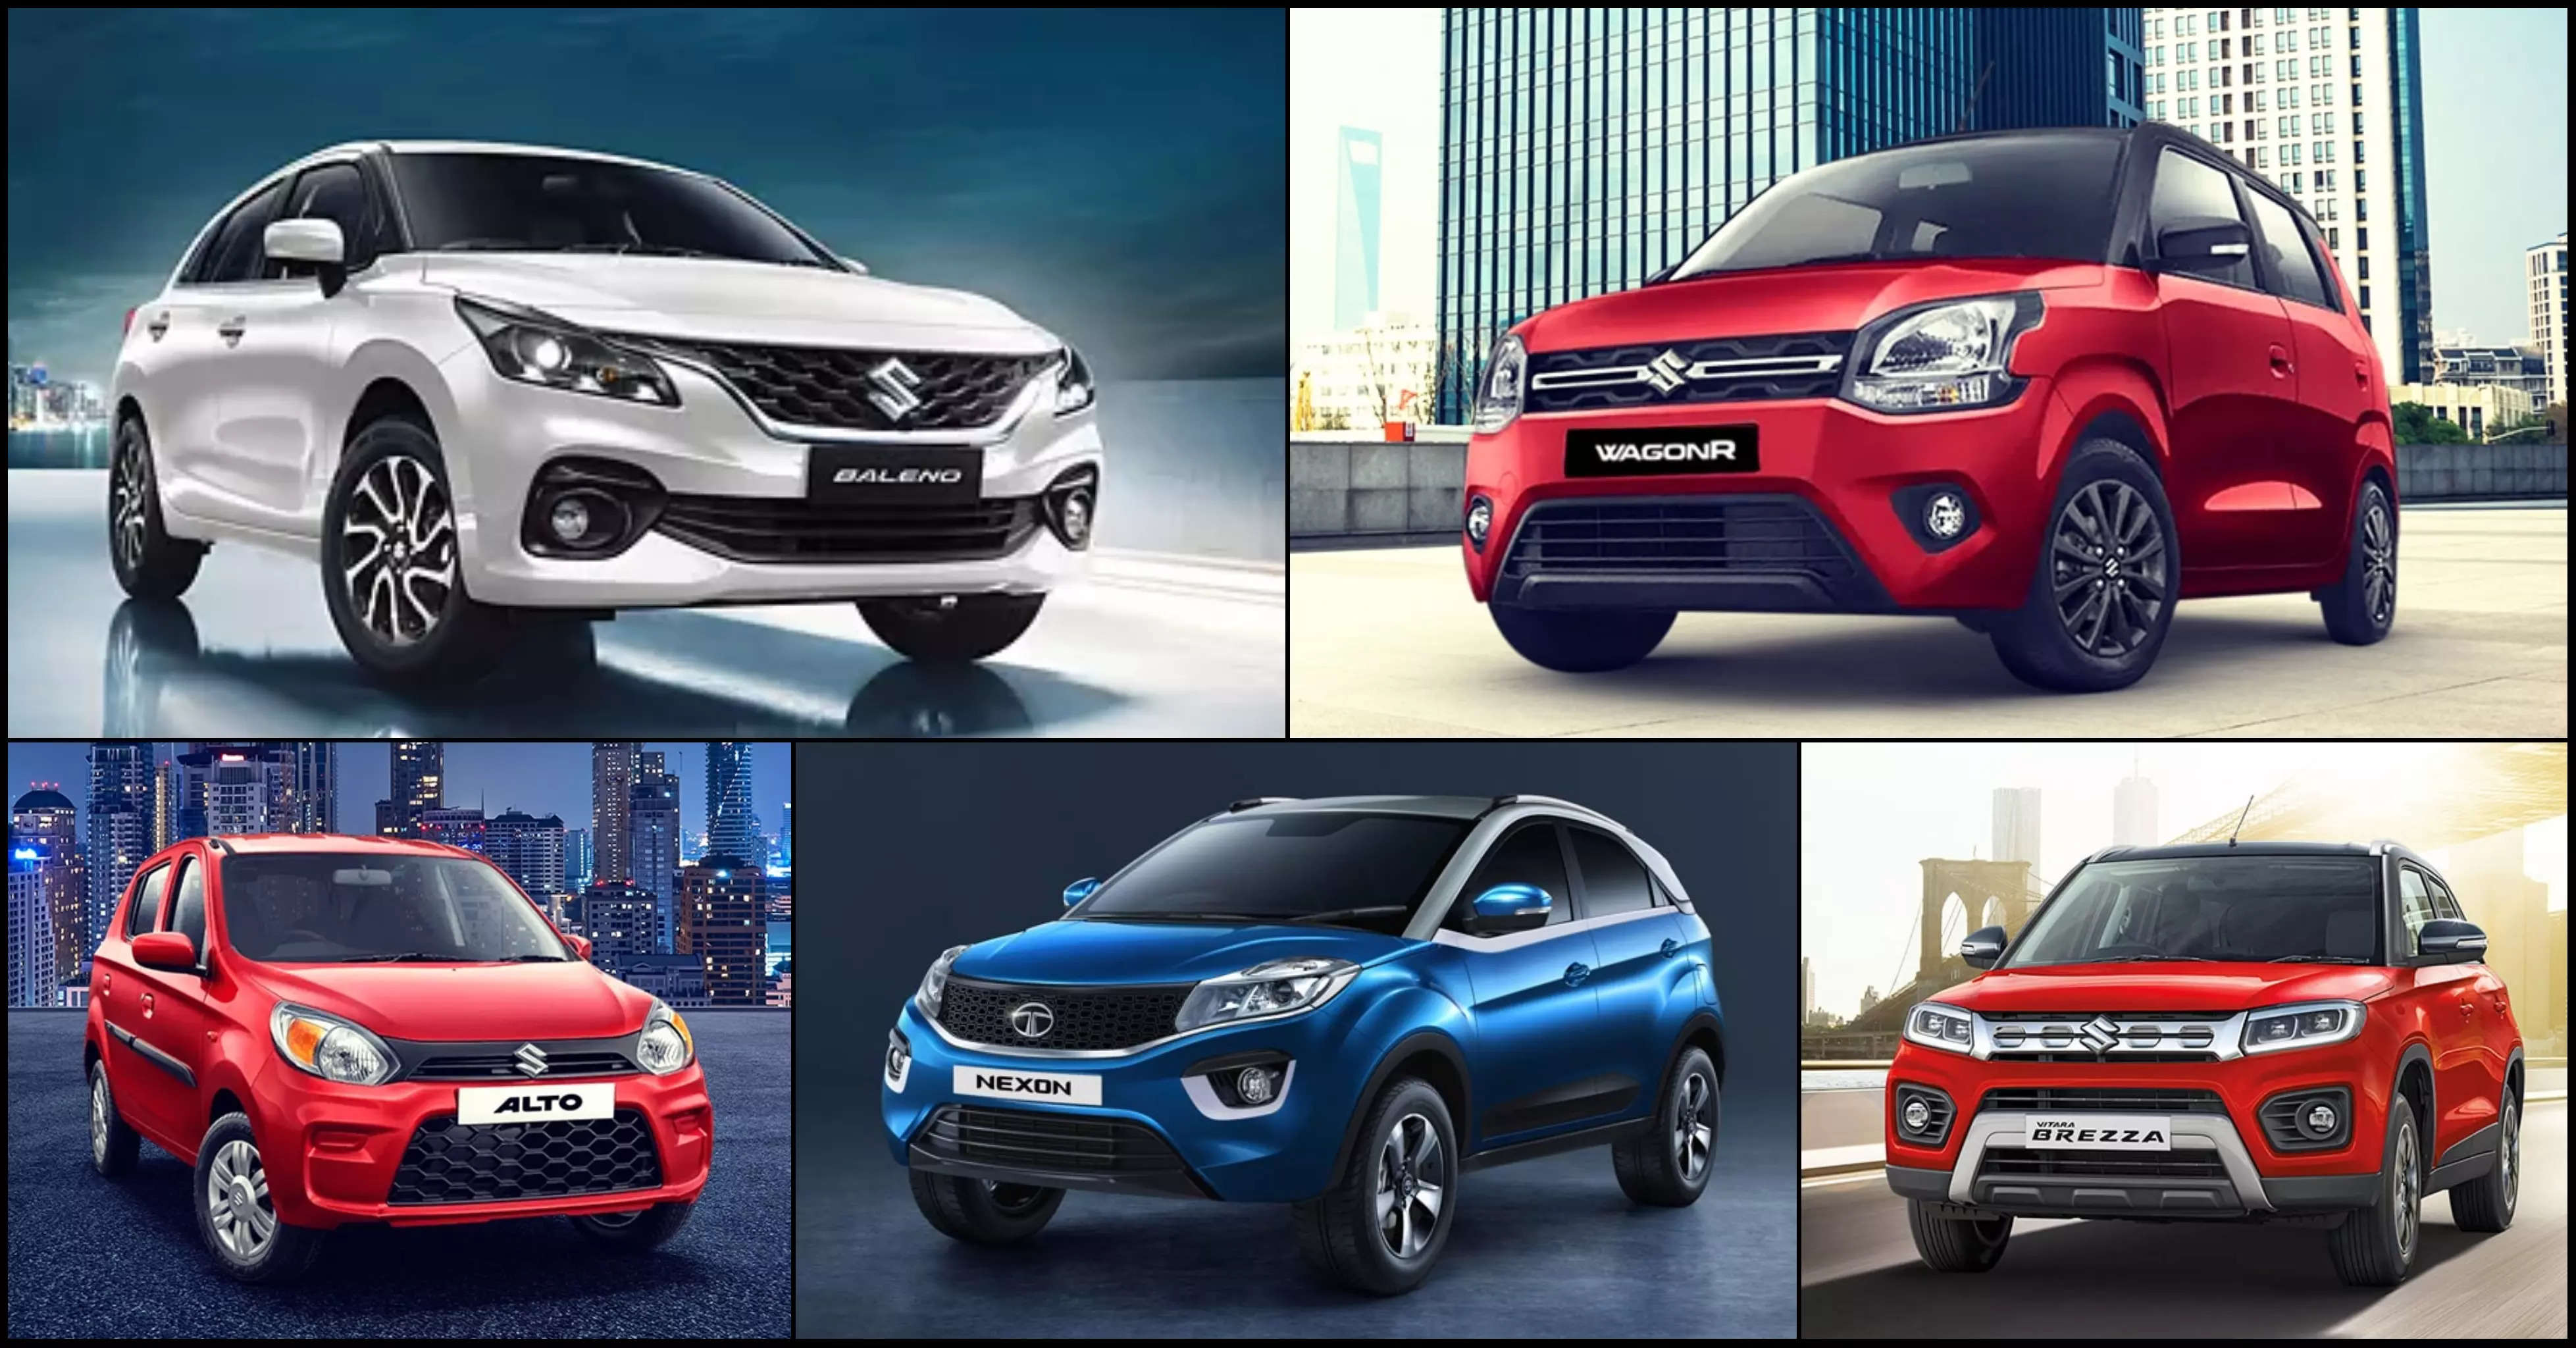 Top 10 PVs in August: Baleno outsells WagonR, SUVs occupy 40% share